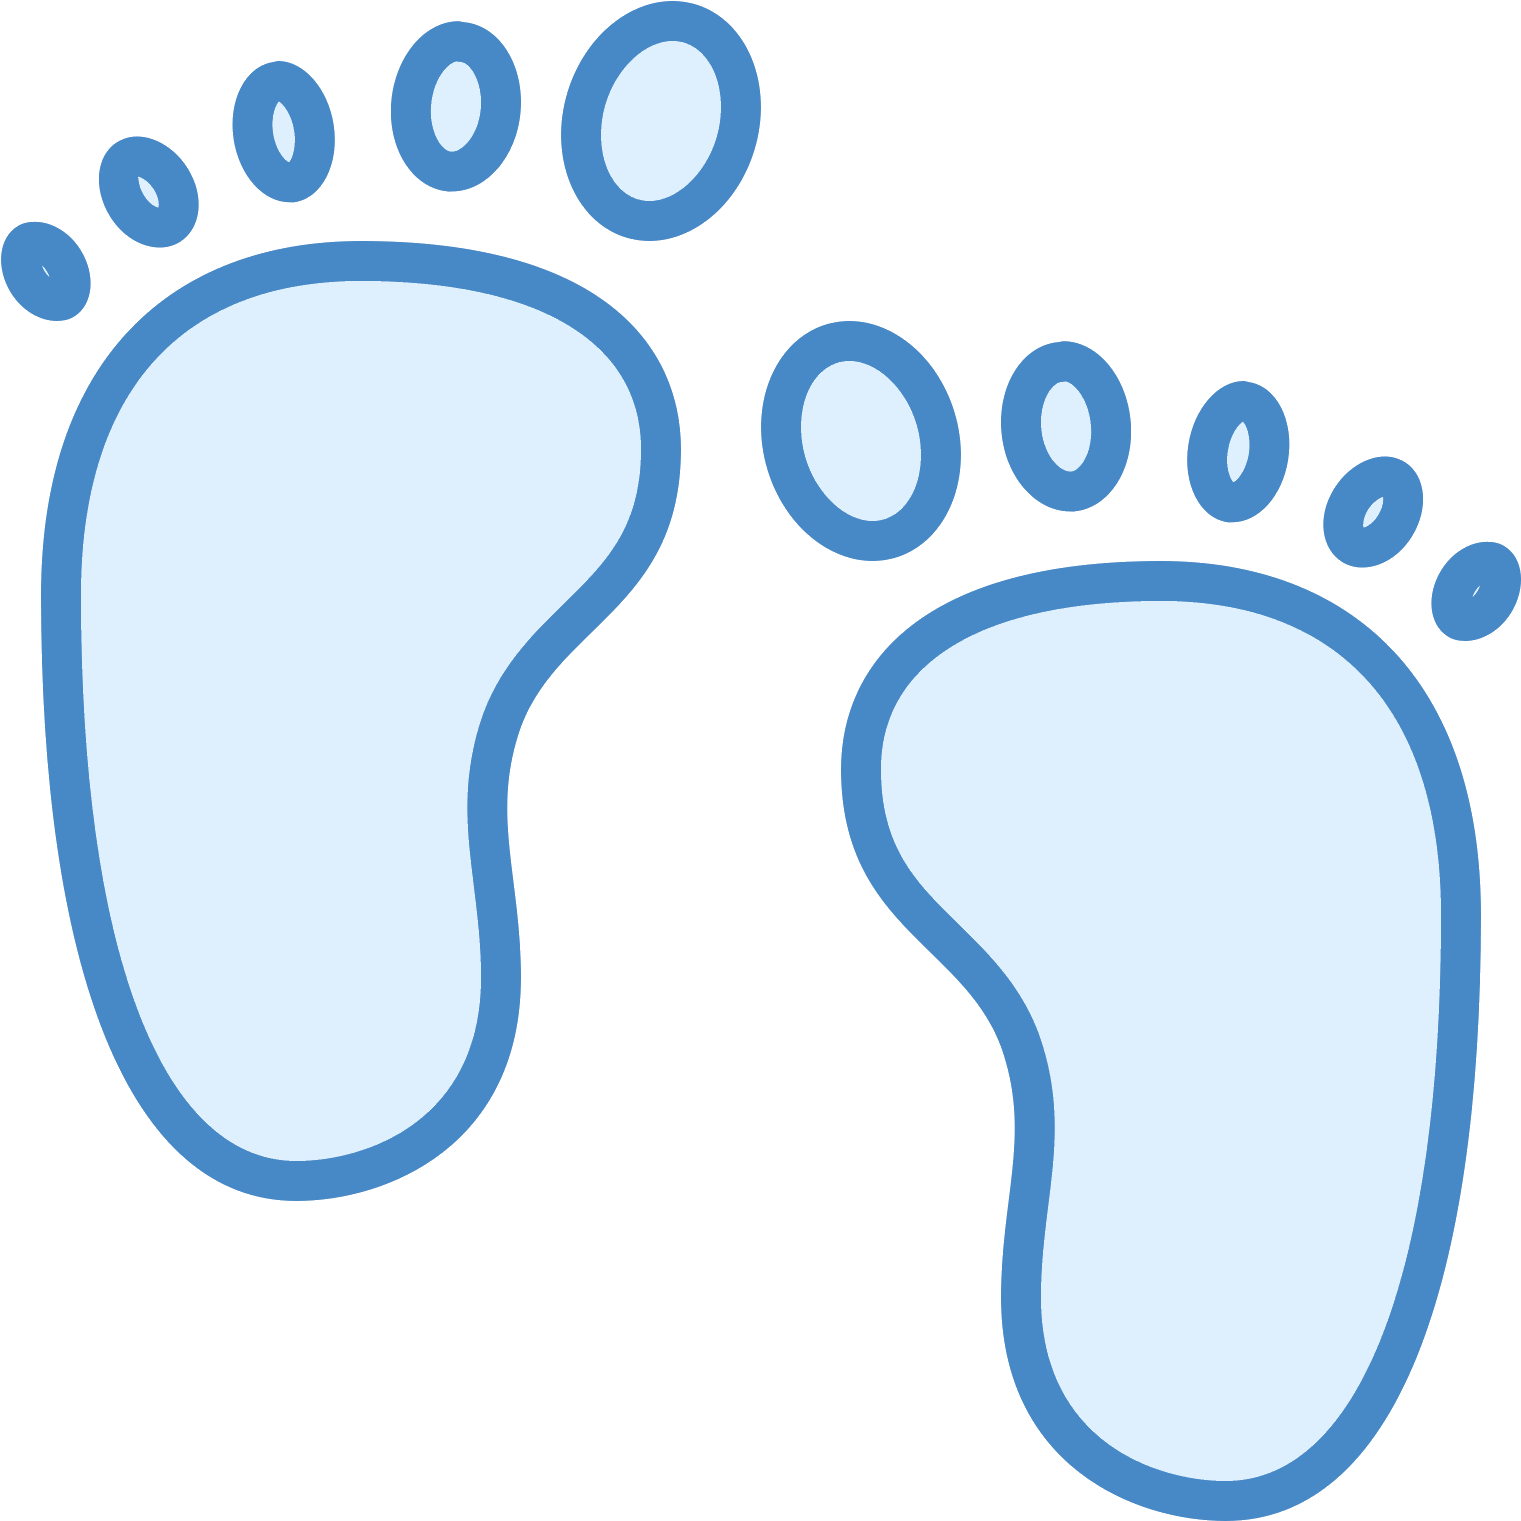 Baby Feet Realistic Royalty Free Cliparts, Vectors, - Home Button (1600x1600)